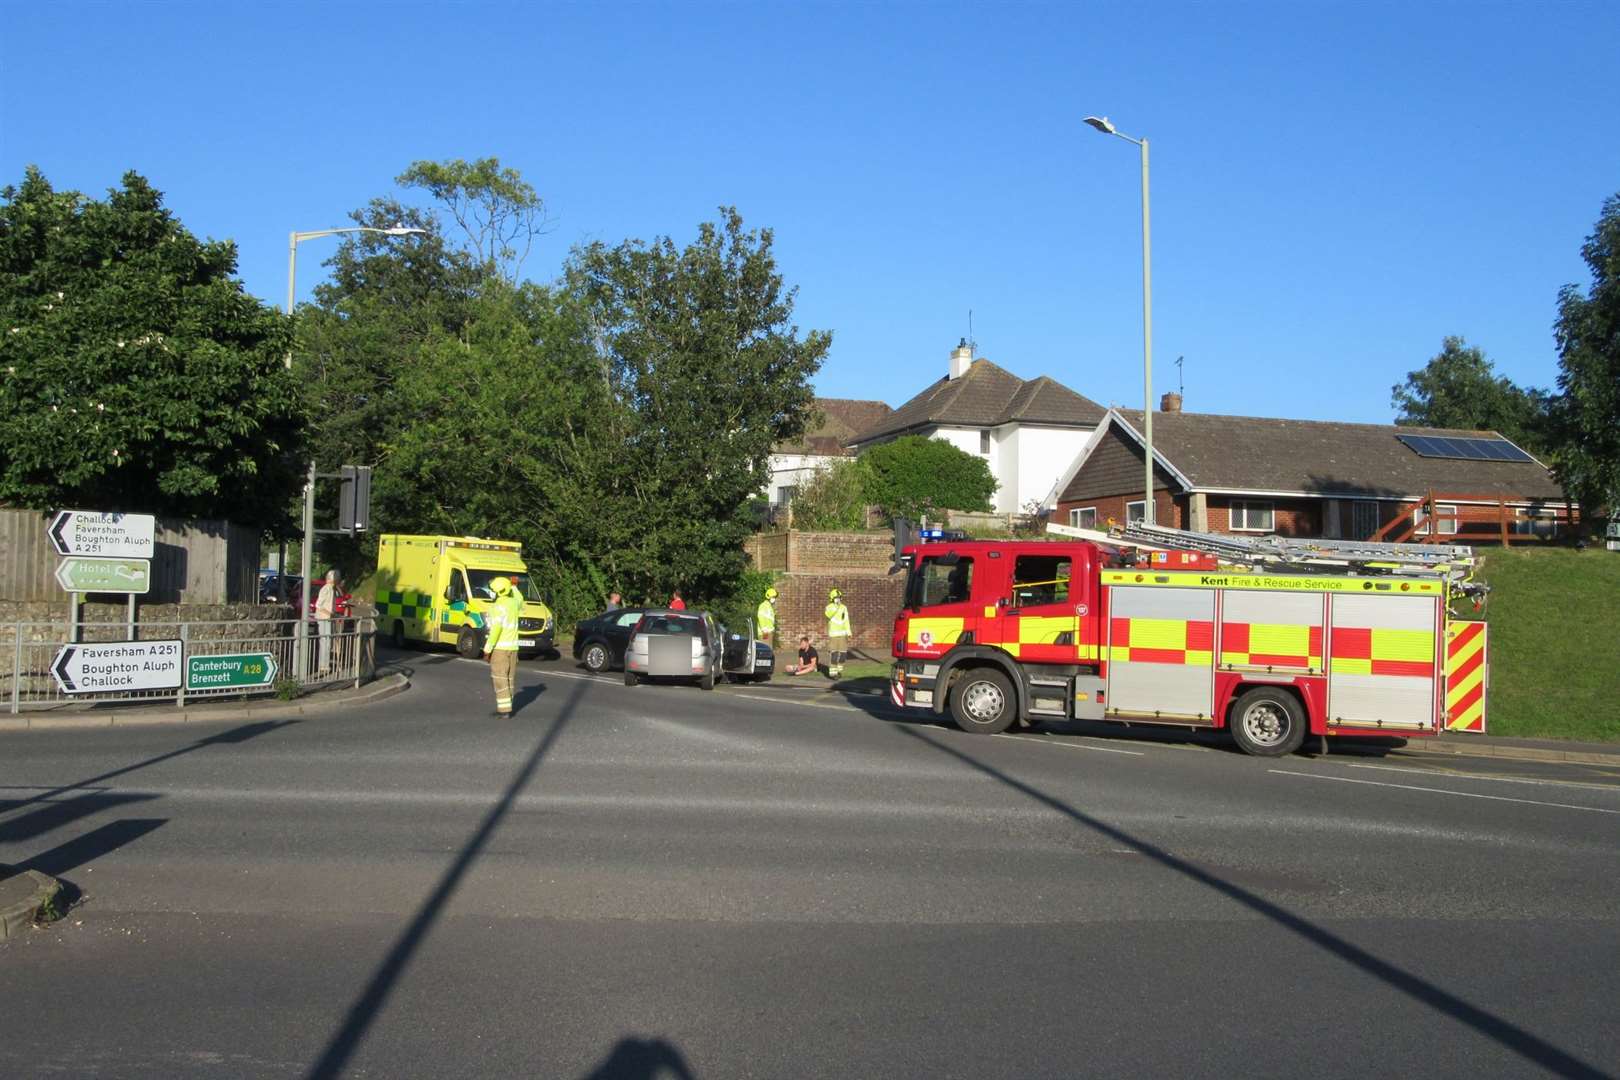 The scene of the crash in Kennington. Photo: Ted Prangnell